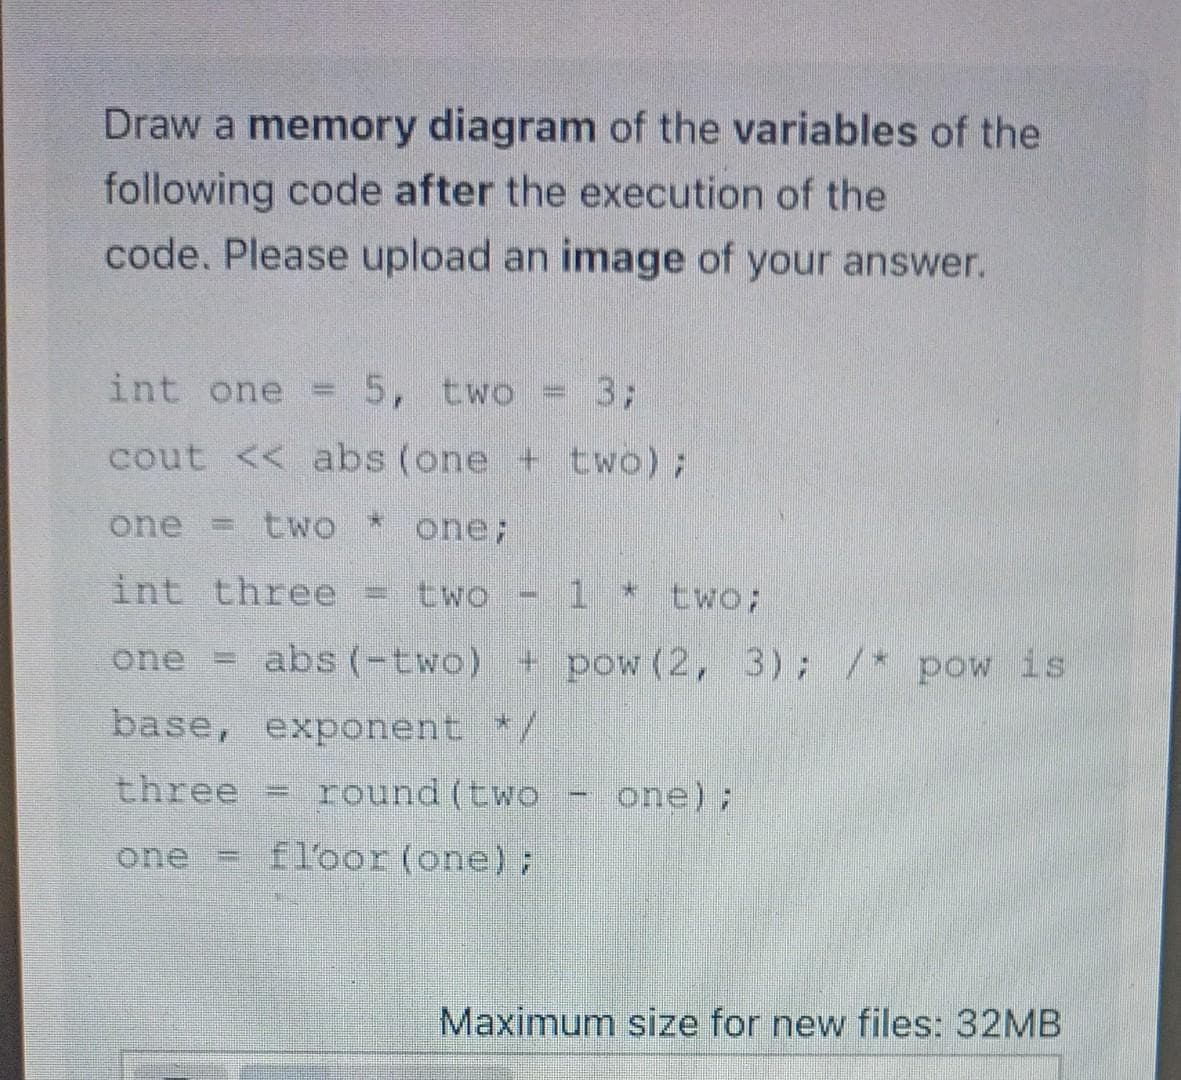 Draw a memory diagram of the variables of the
following code after the execution of the
code. Please upload an image of your answer.
int one
5, two
3;
cout << abs (one + two);
one = tWO
one;
int three
two - 1 *
two;
one
abs (-two) + pow (2, 3); /* pow is
base, exponent */
three
round (two
one);
one
floor (one):
Maximum size for new files: 32MB
